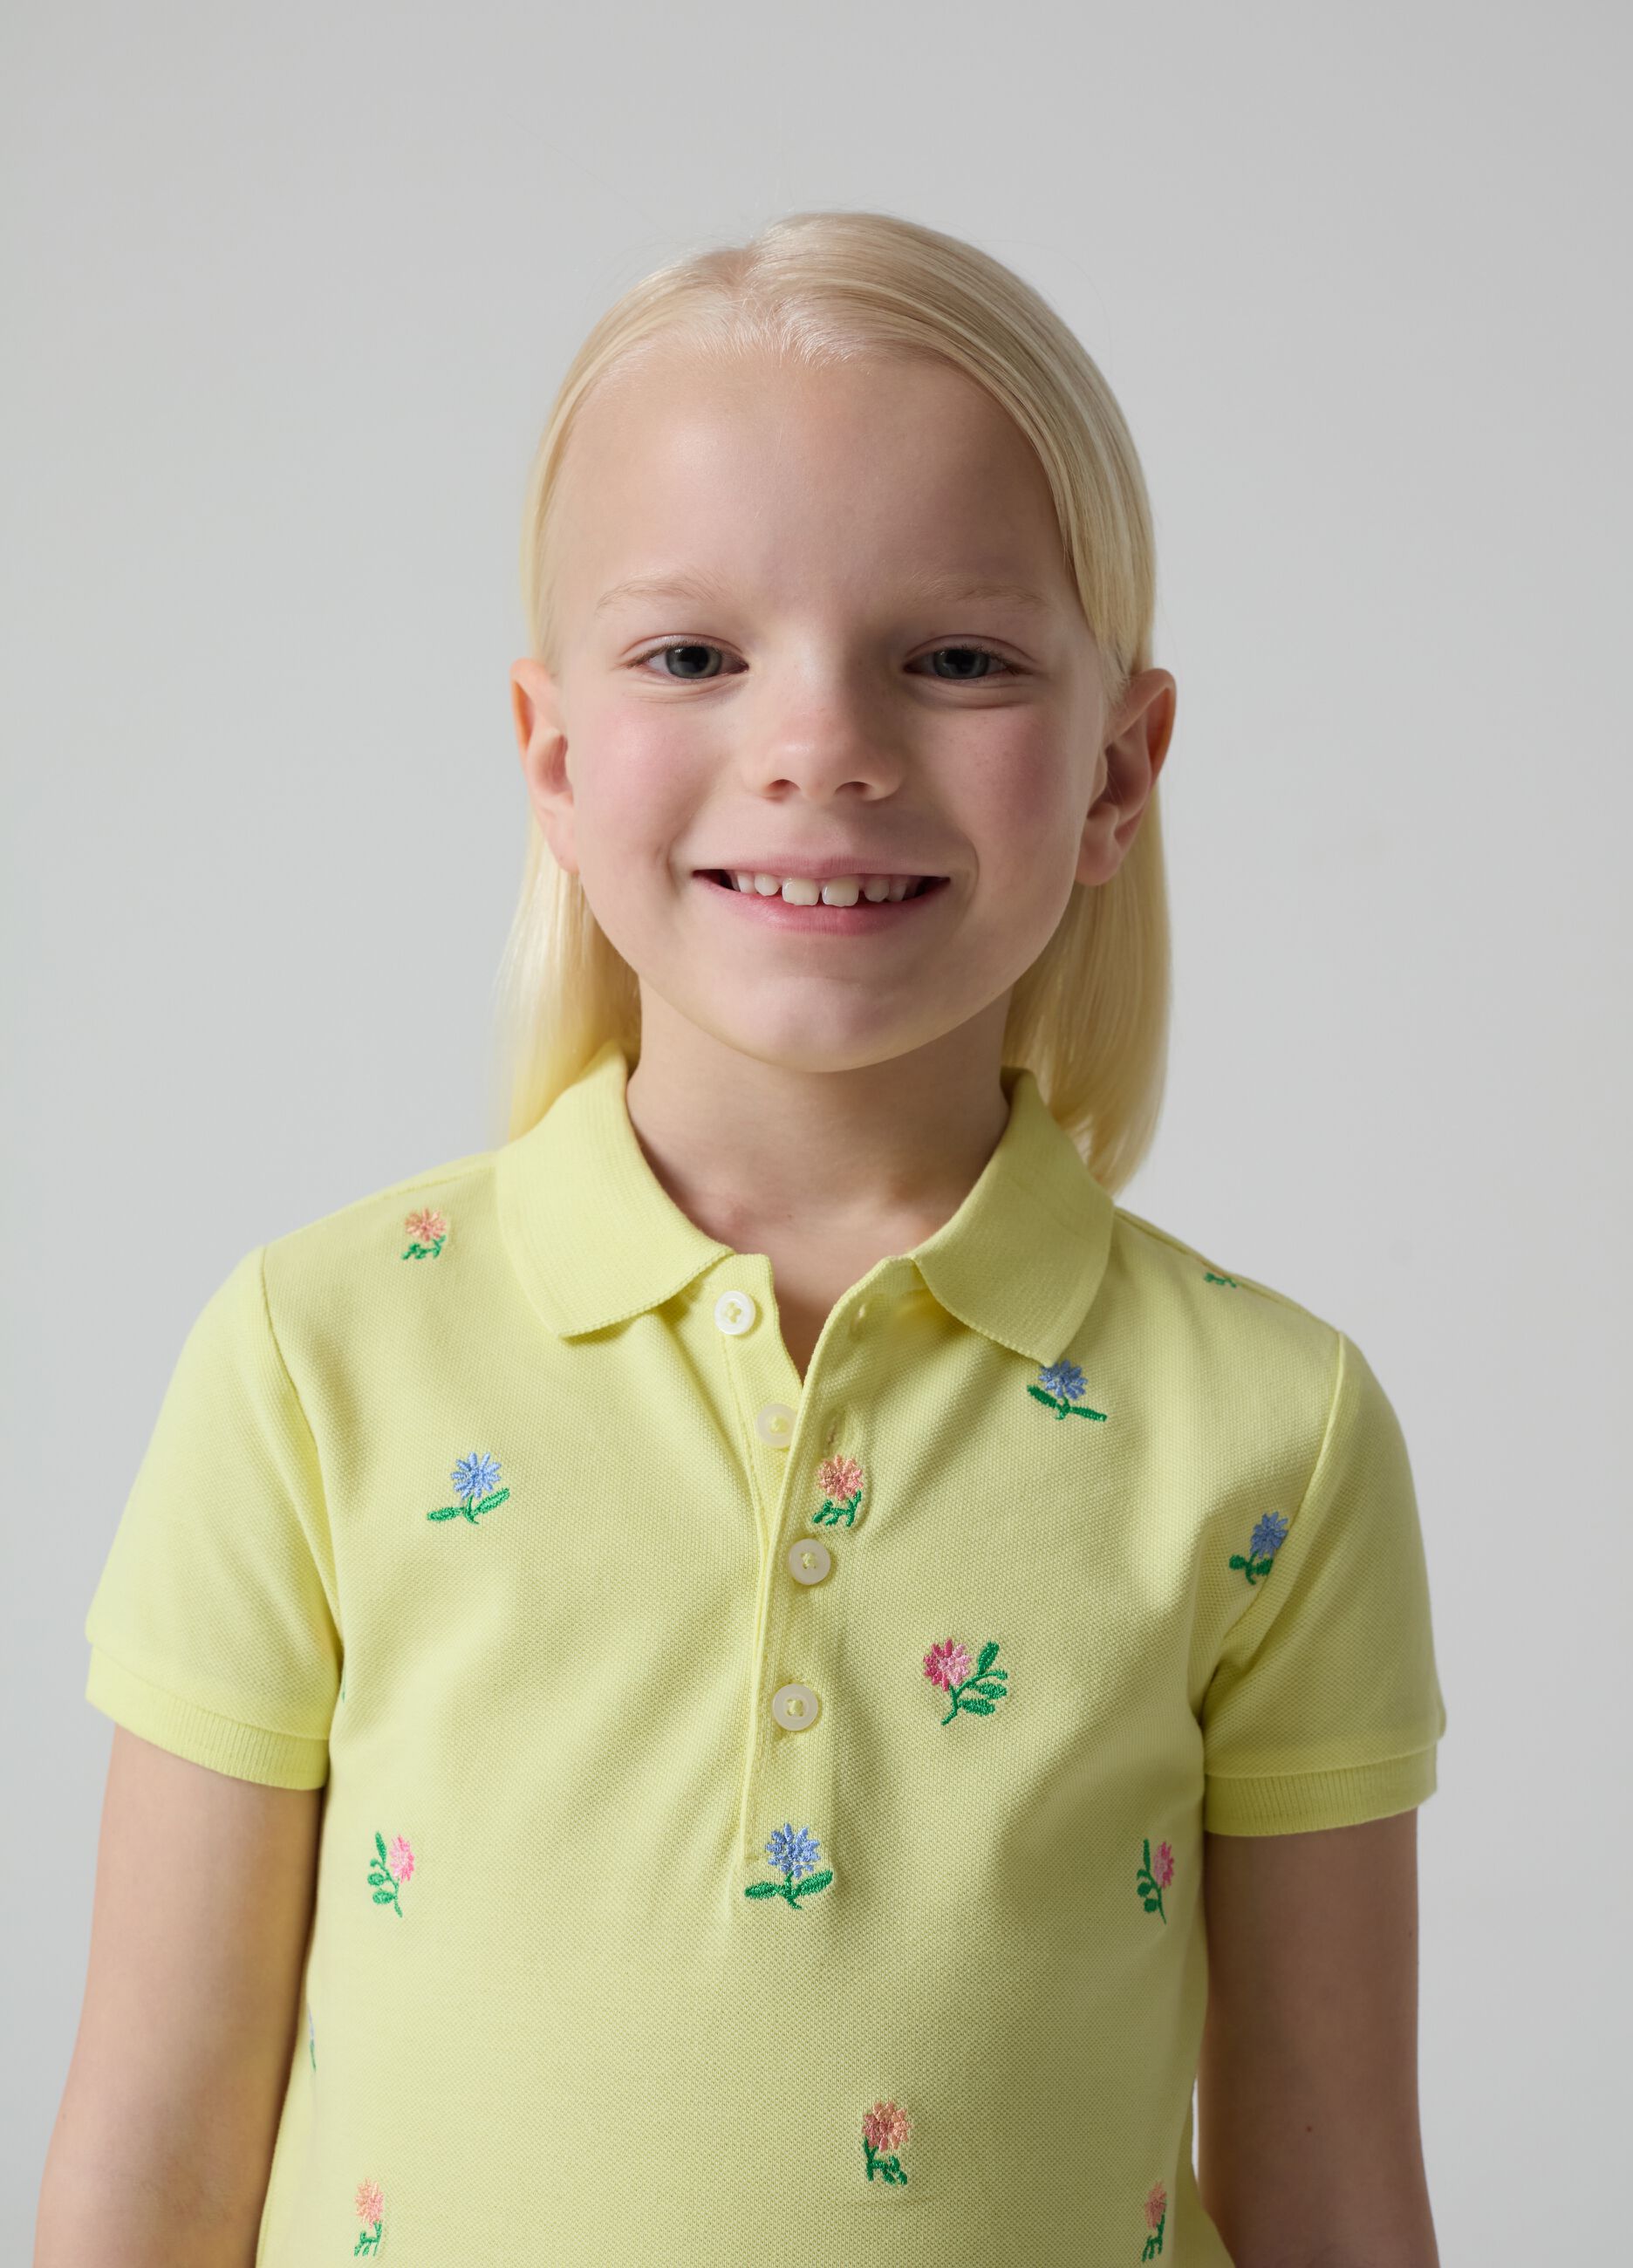 Piquet polo shirt with floral embroidery